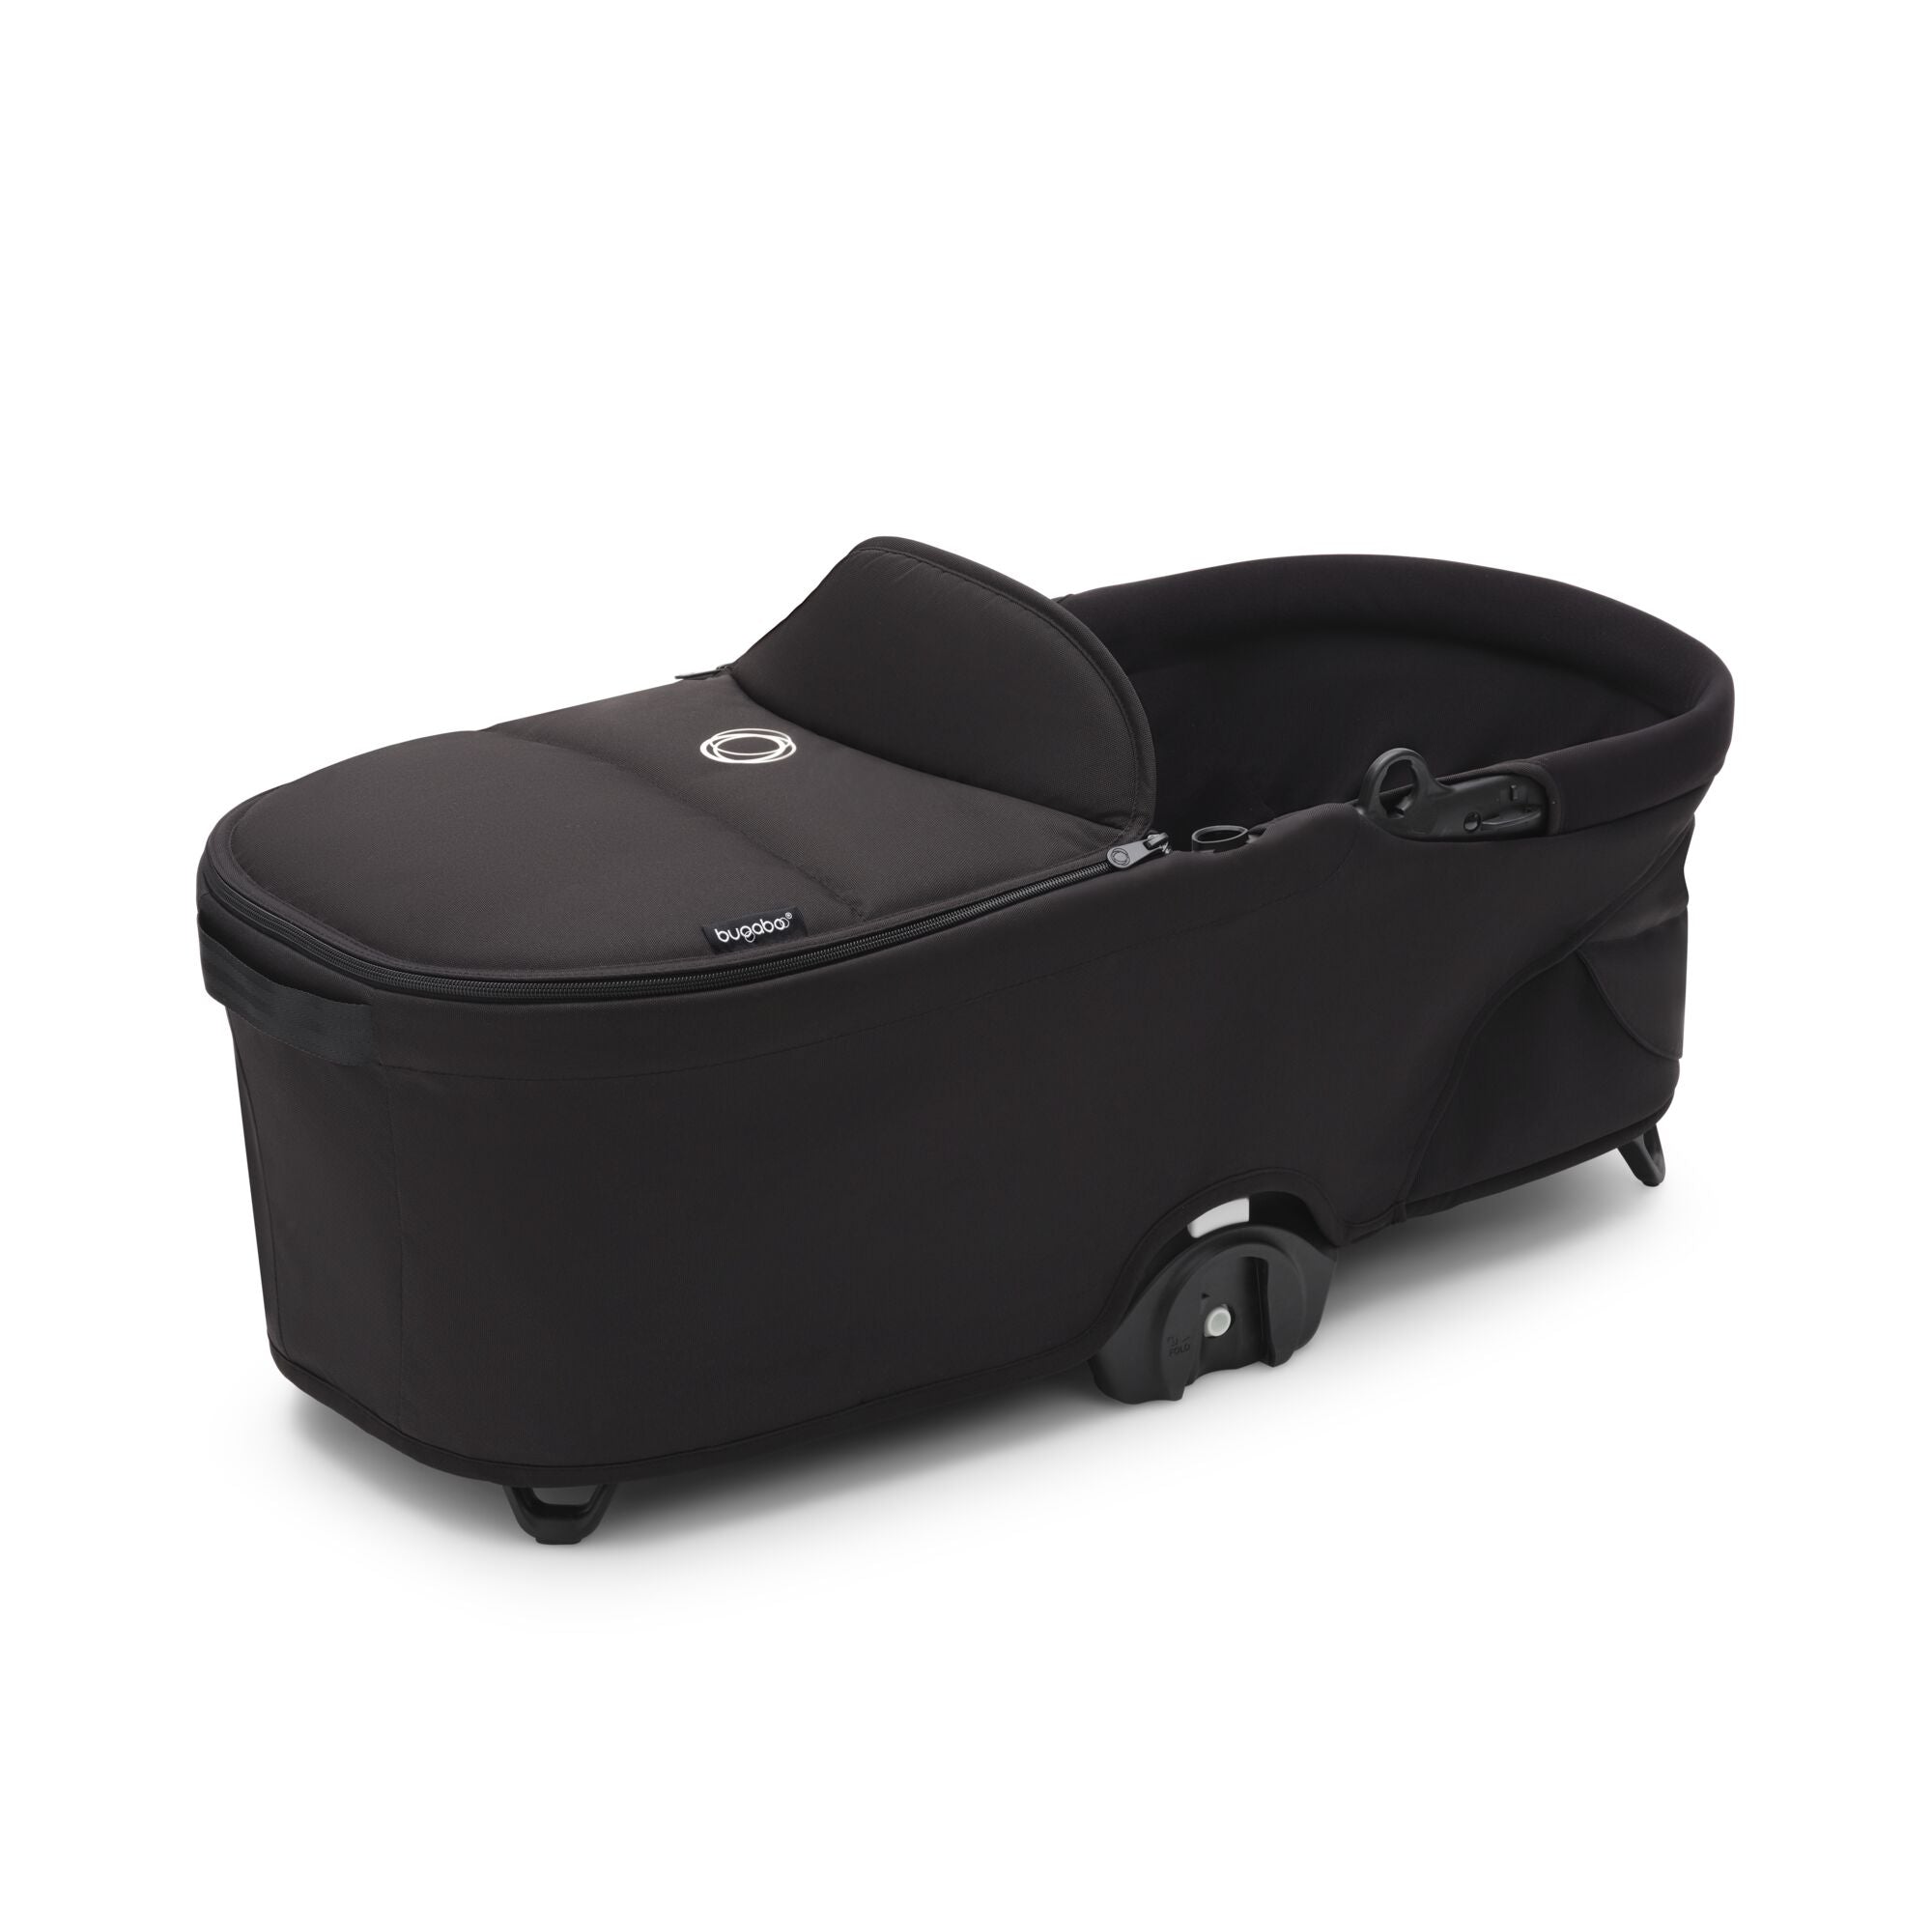 Bugaboo Dragonfly carrycot complete